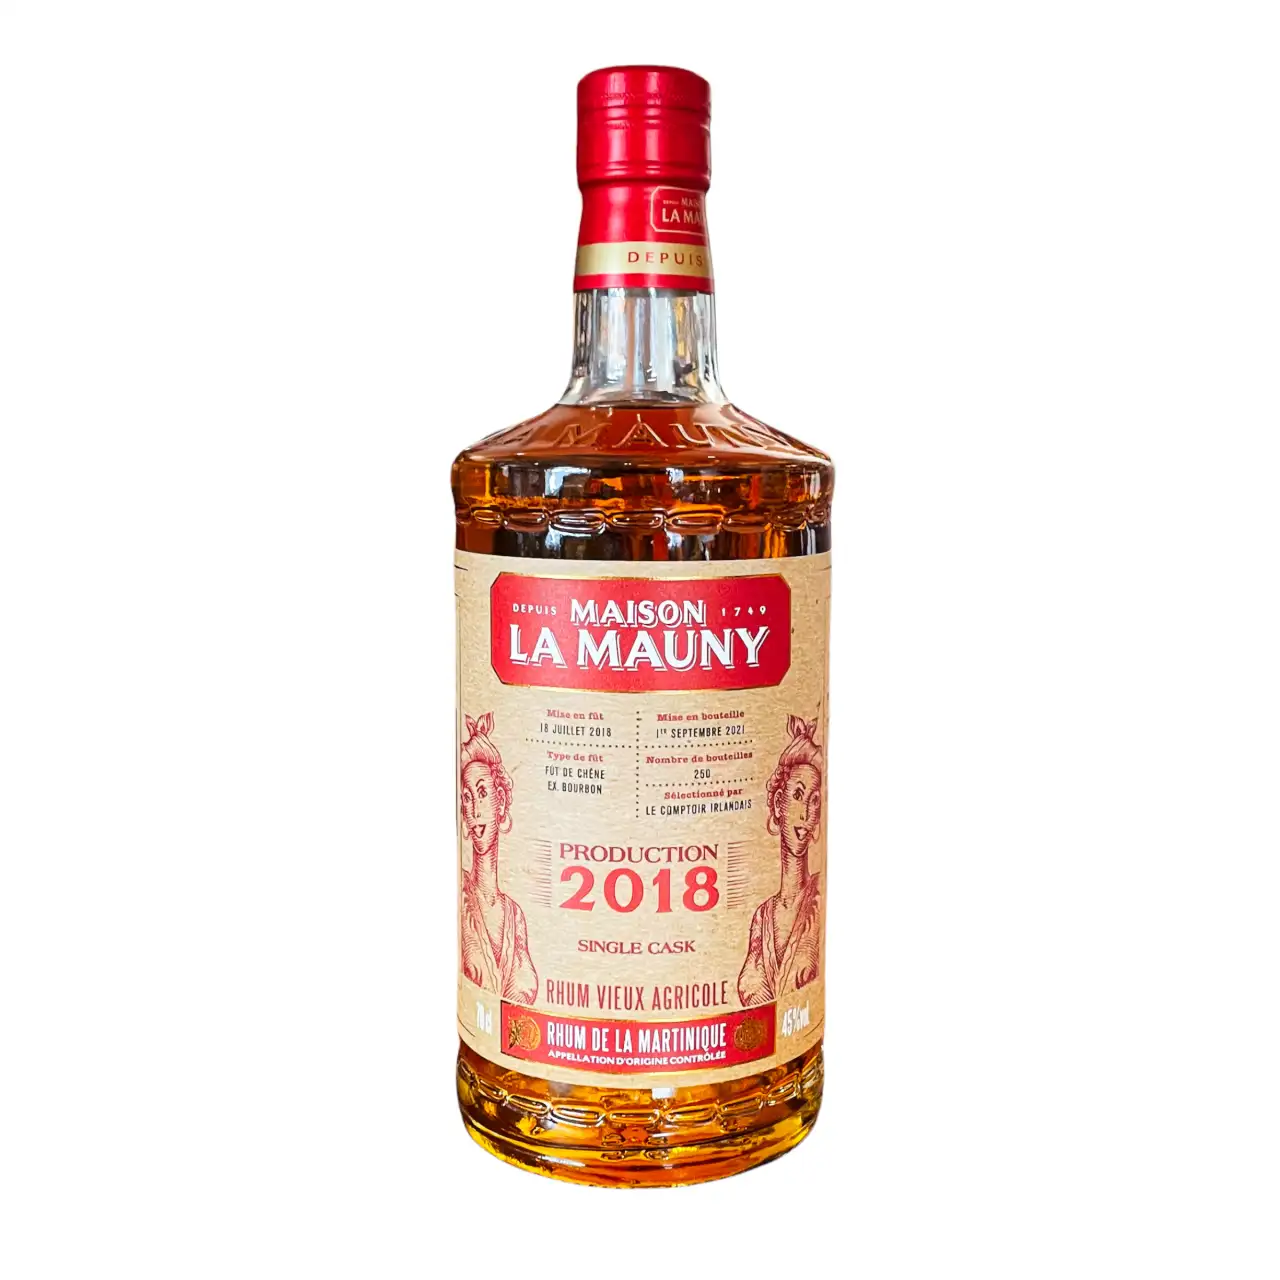 Image of the front of the bottle of the rum Production 2018 (Le Comptoir Irlandais)